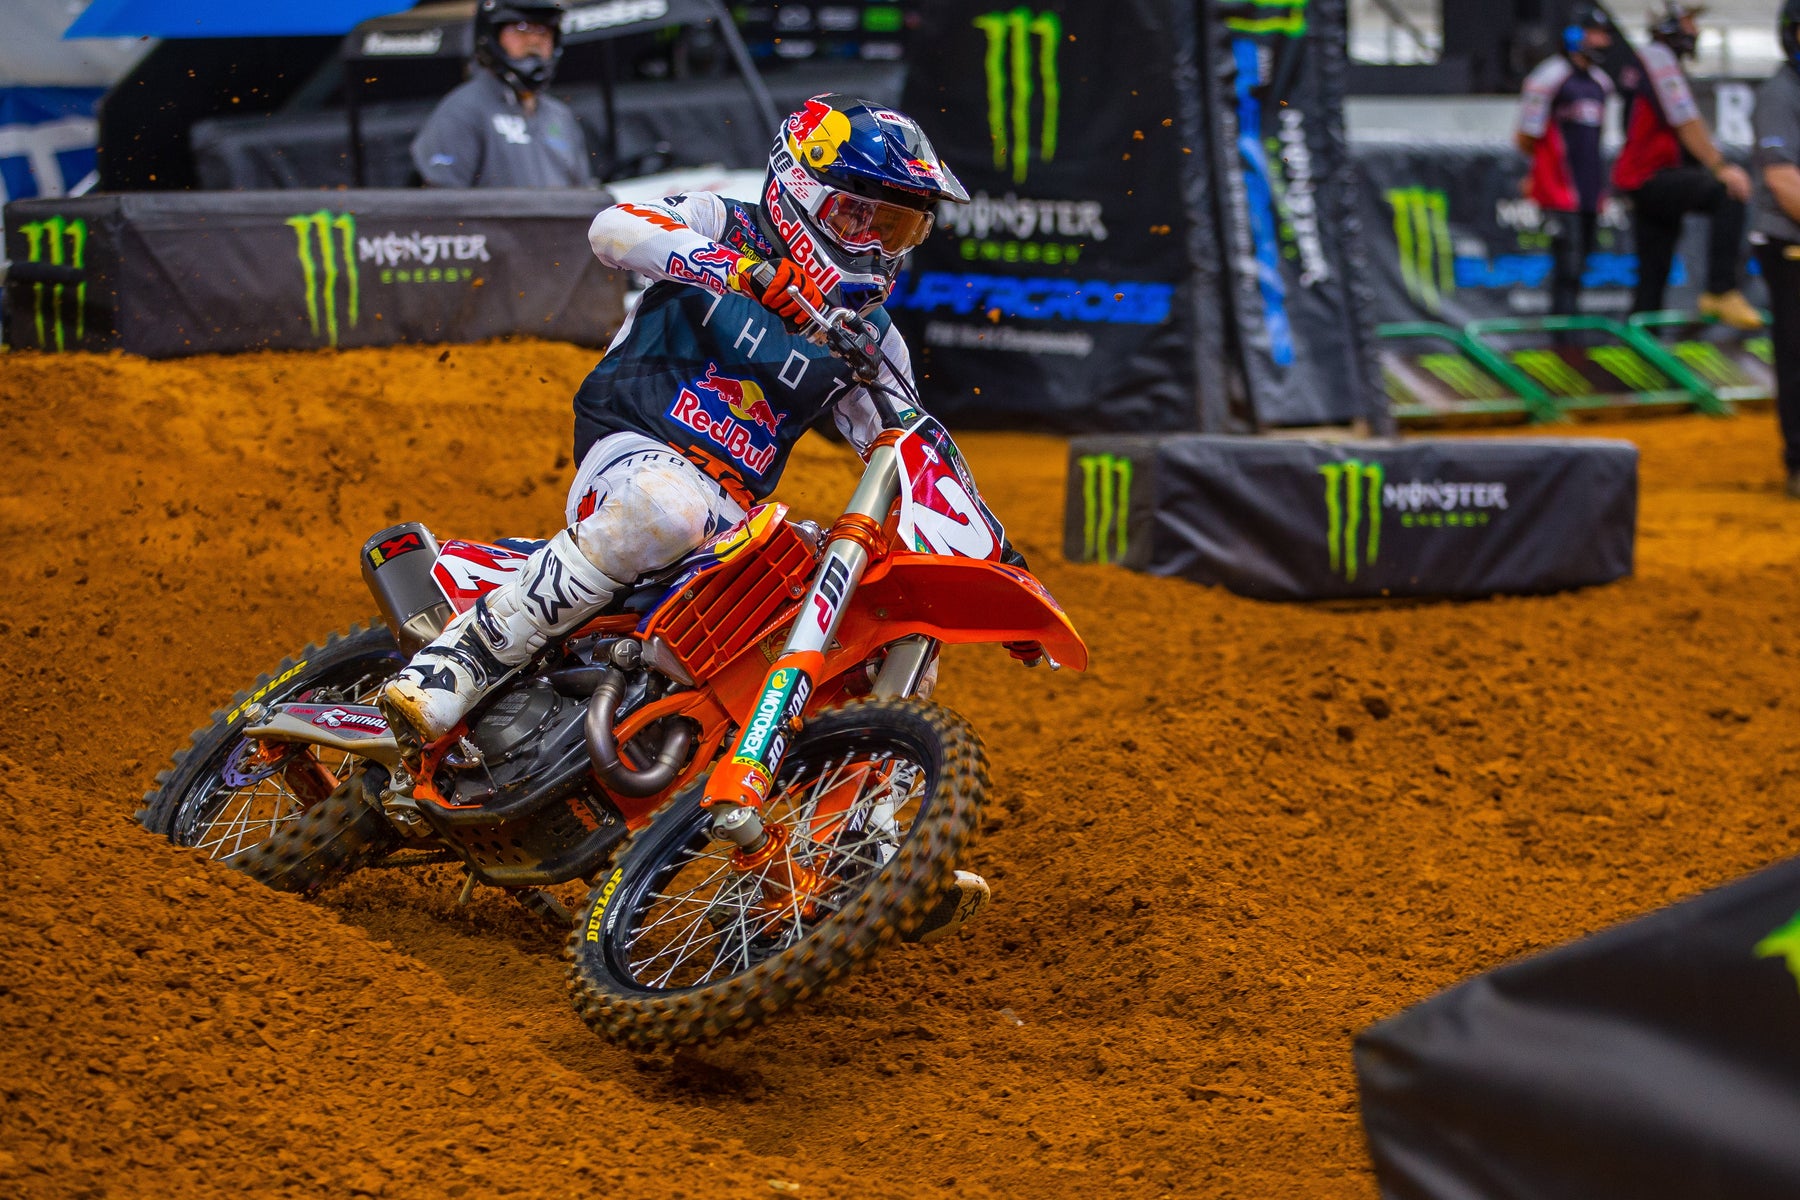 ALPINESTARS 1,2 AS COOPER WEBB DOMINATES ARLINGTON 2 (WEST) 450SX TO ADD ANOTHER VICTORY TO HIS BELT